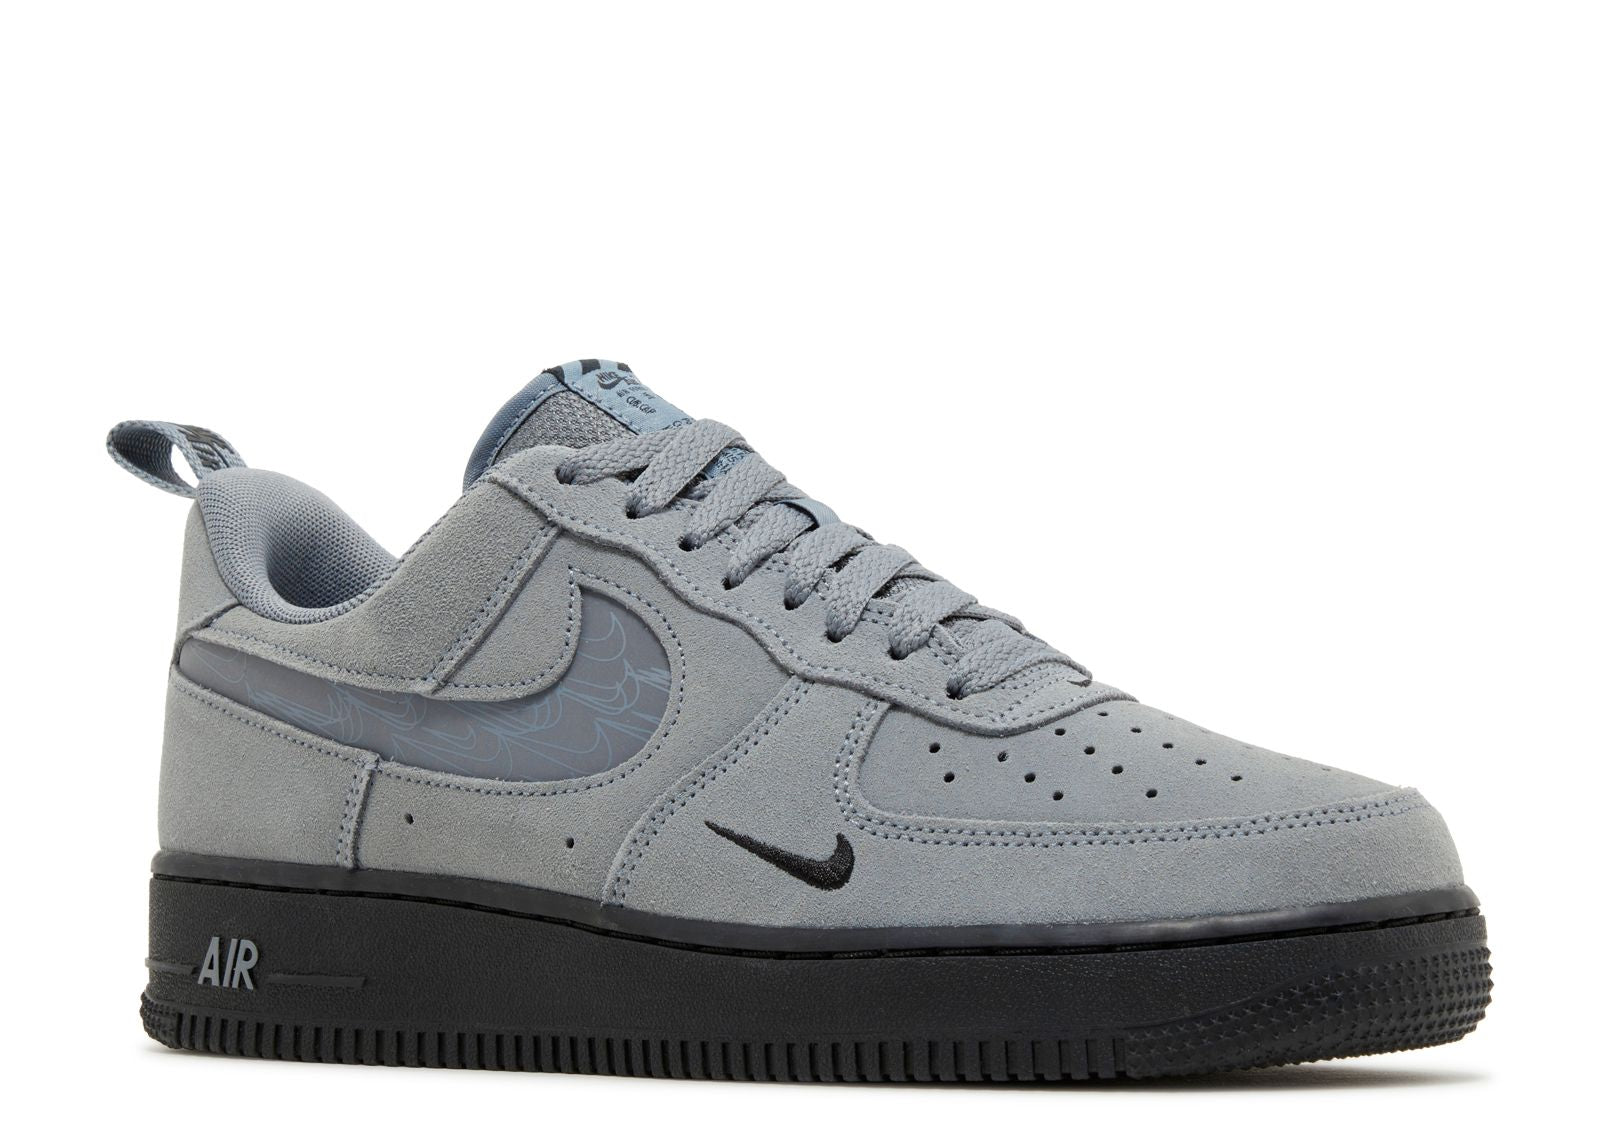 AIR FORCE 1 '07 LV8 'REFLECTIVE SWOOSH - COOL GREY'